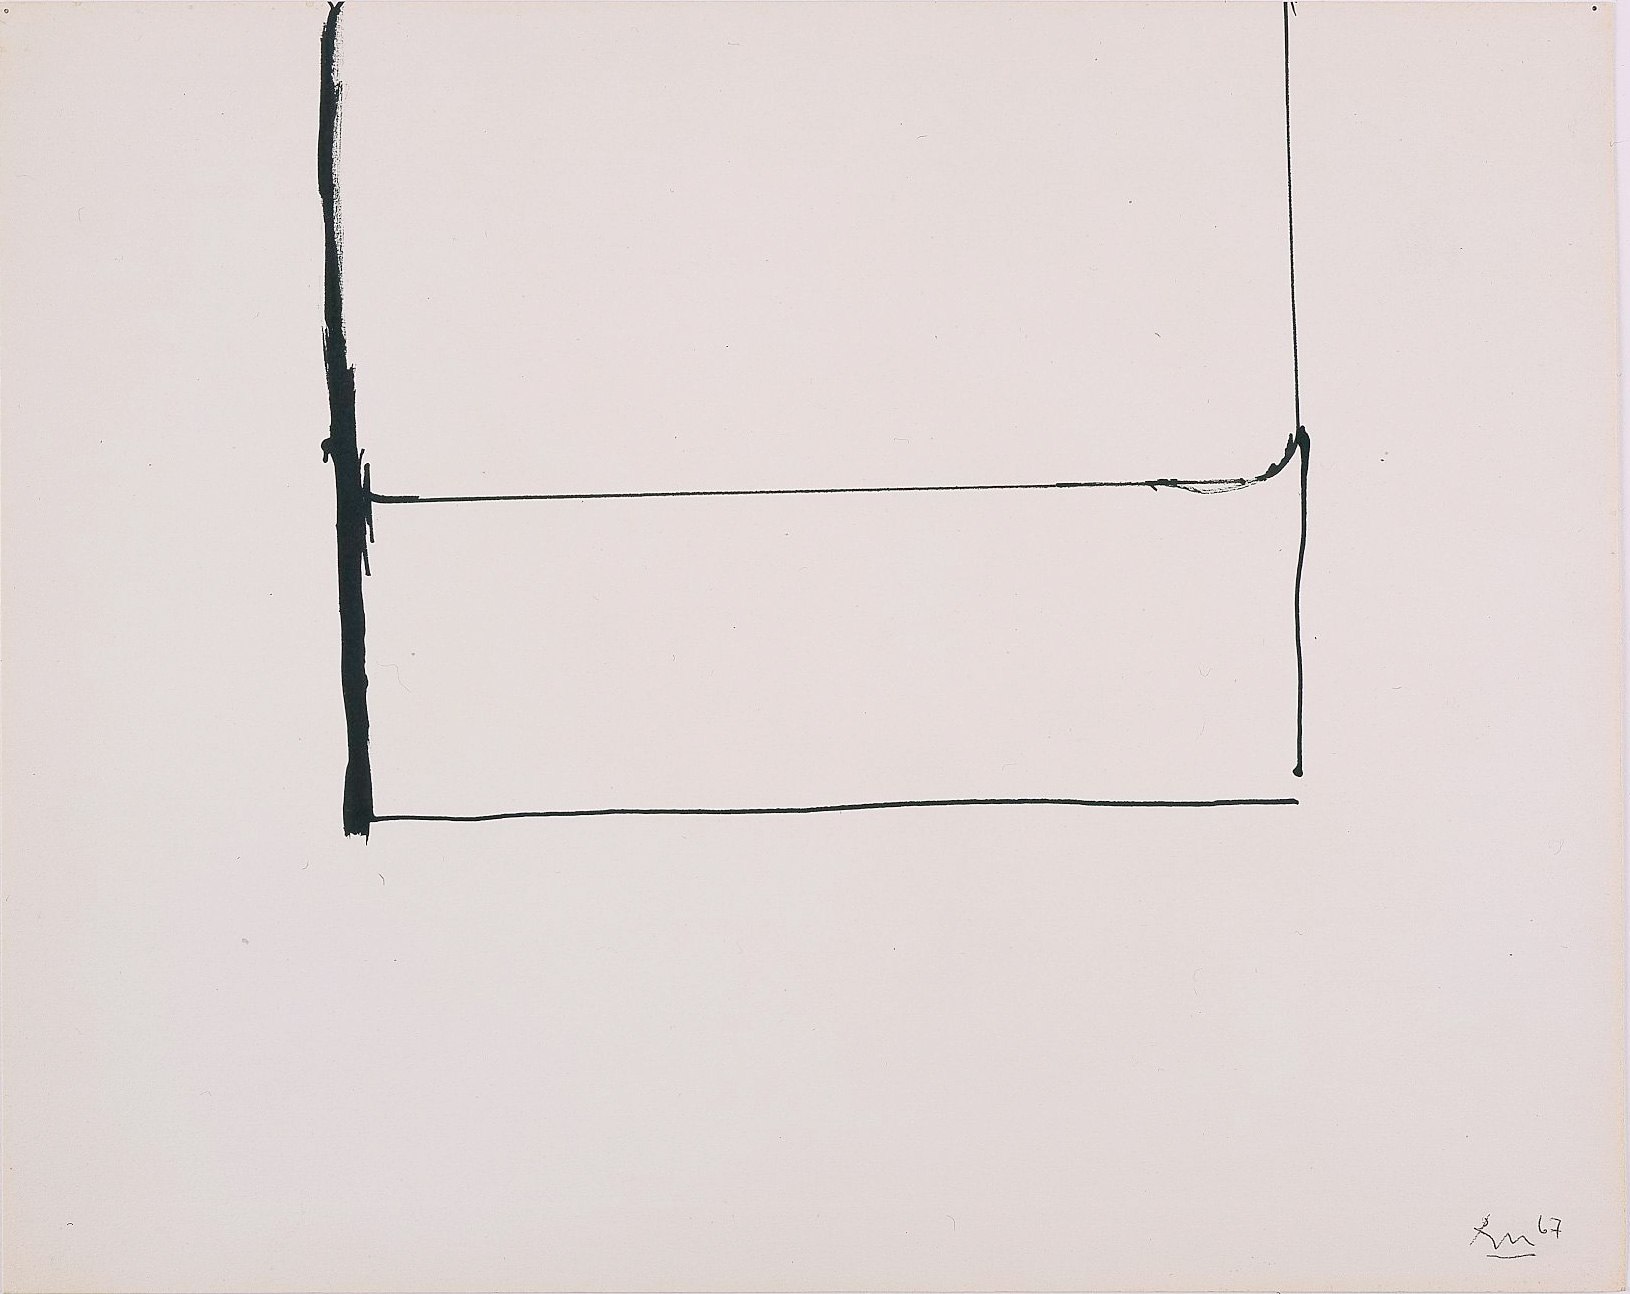 Open Drawing, 1967, ink on paper, 11 3/8 ✕ 14 3/8 in. (28.9 ✕ 36.5 cm)